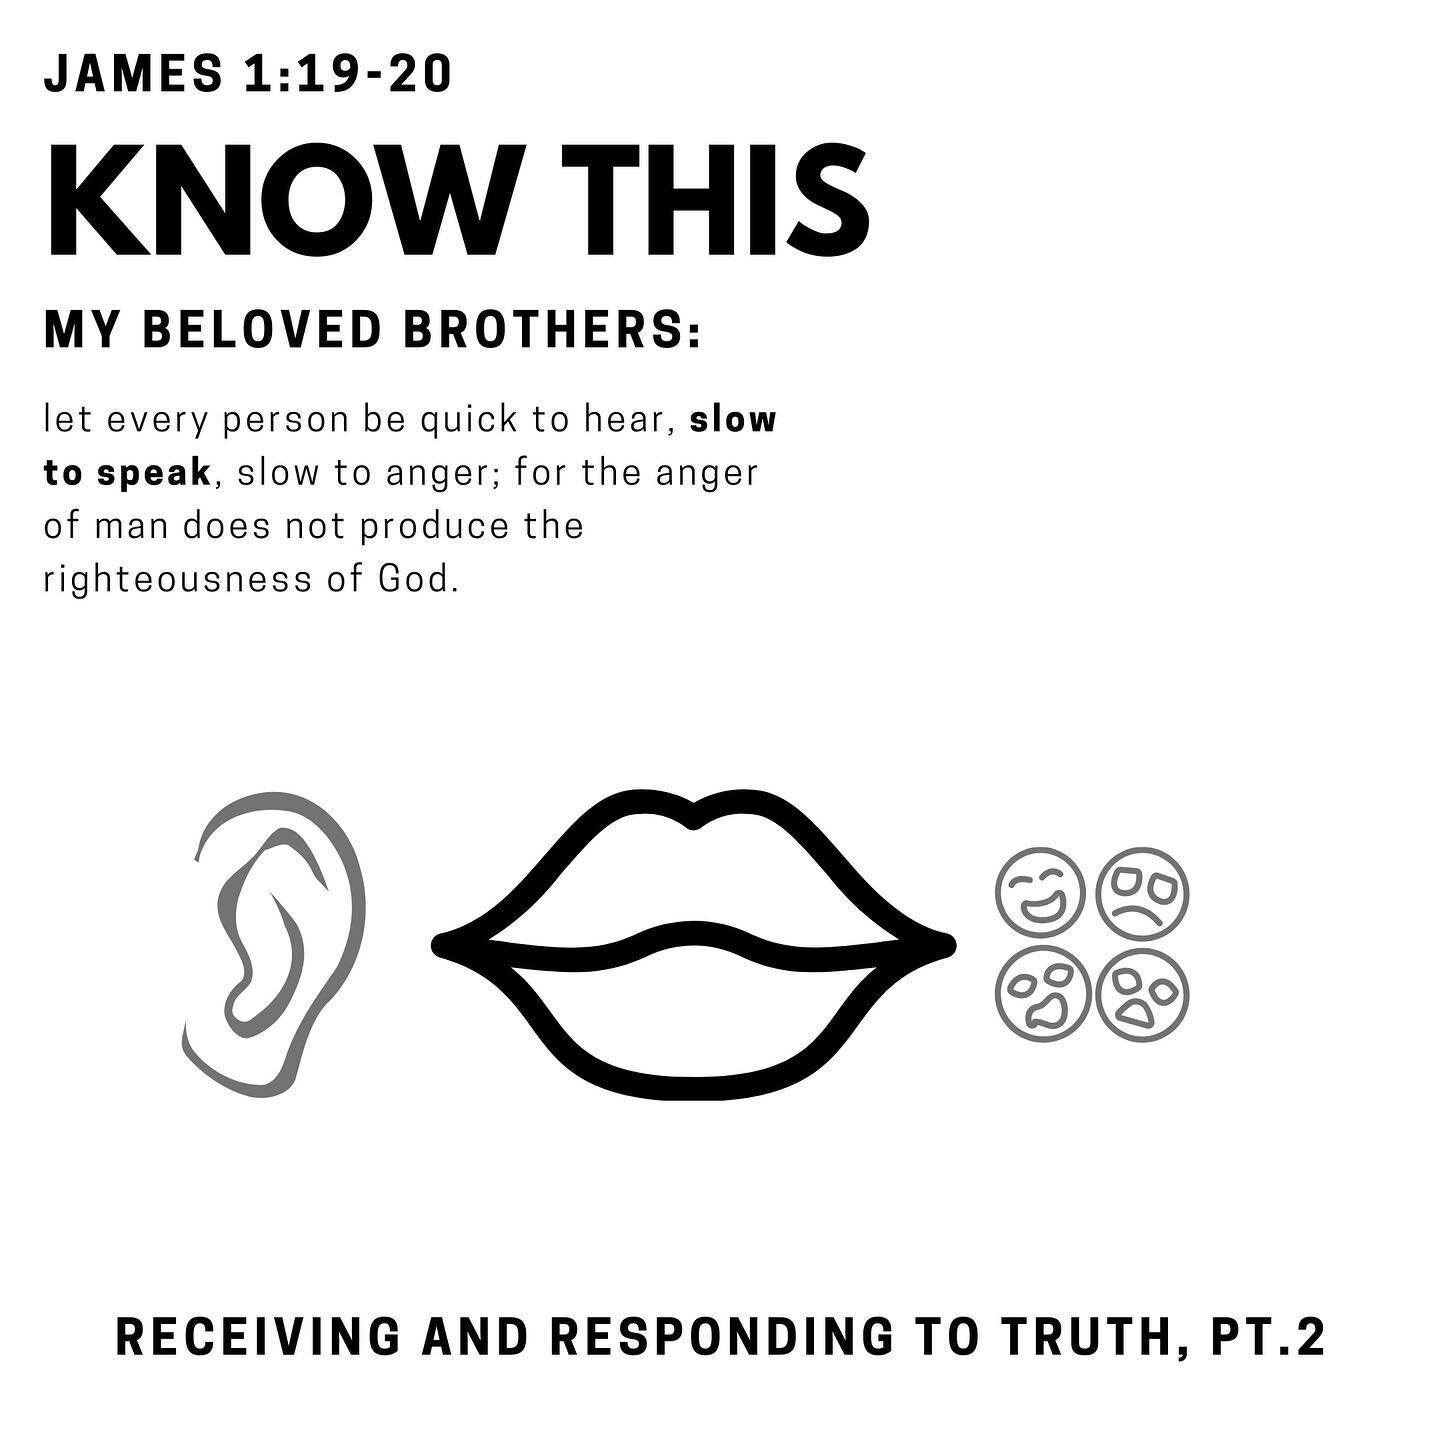 &ldquo;Receiving and Responding to Truth, pt.2&rdquo;
YouTube: https://youtu.be/HF_WoTVY4sI